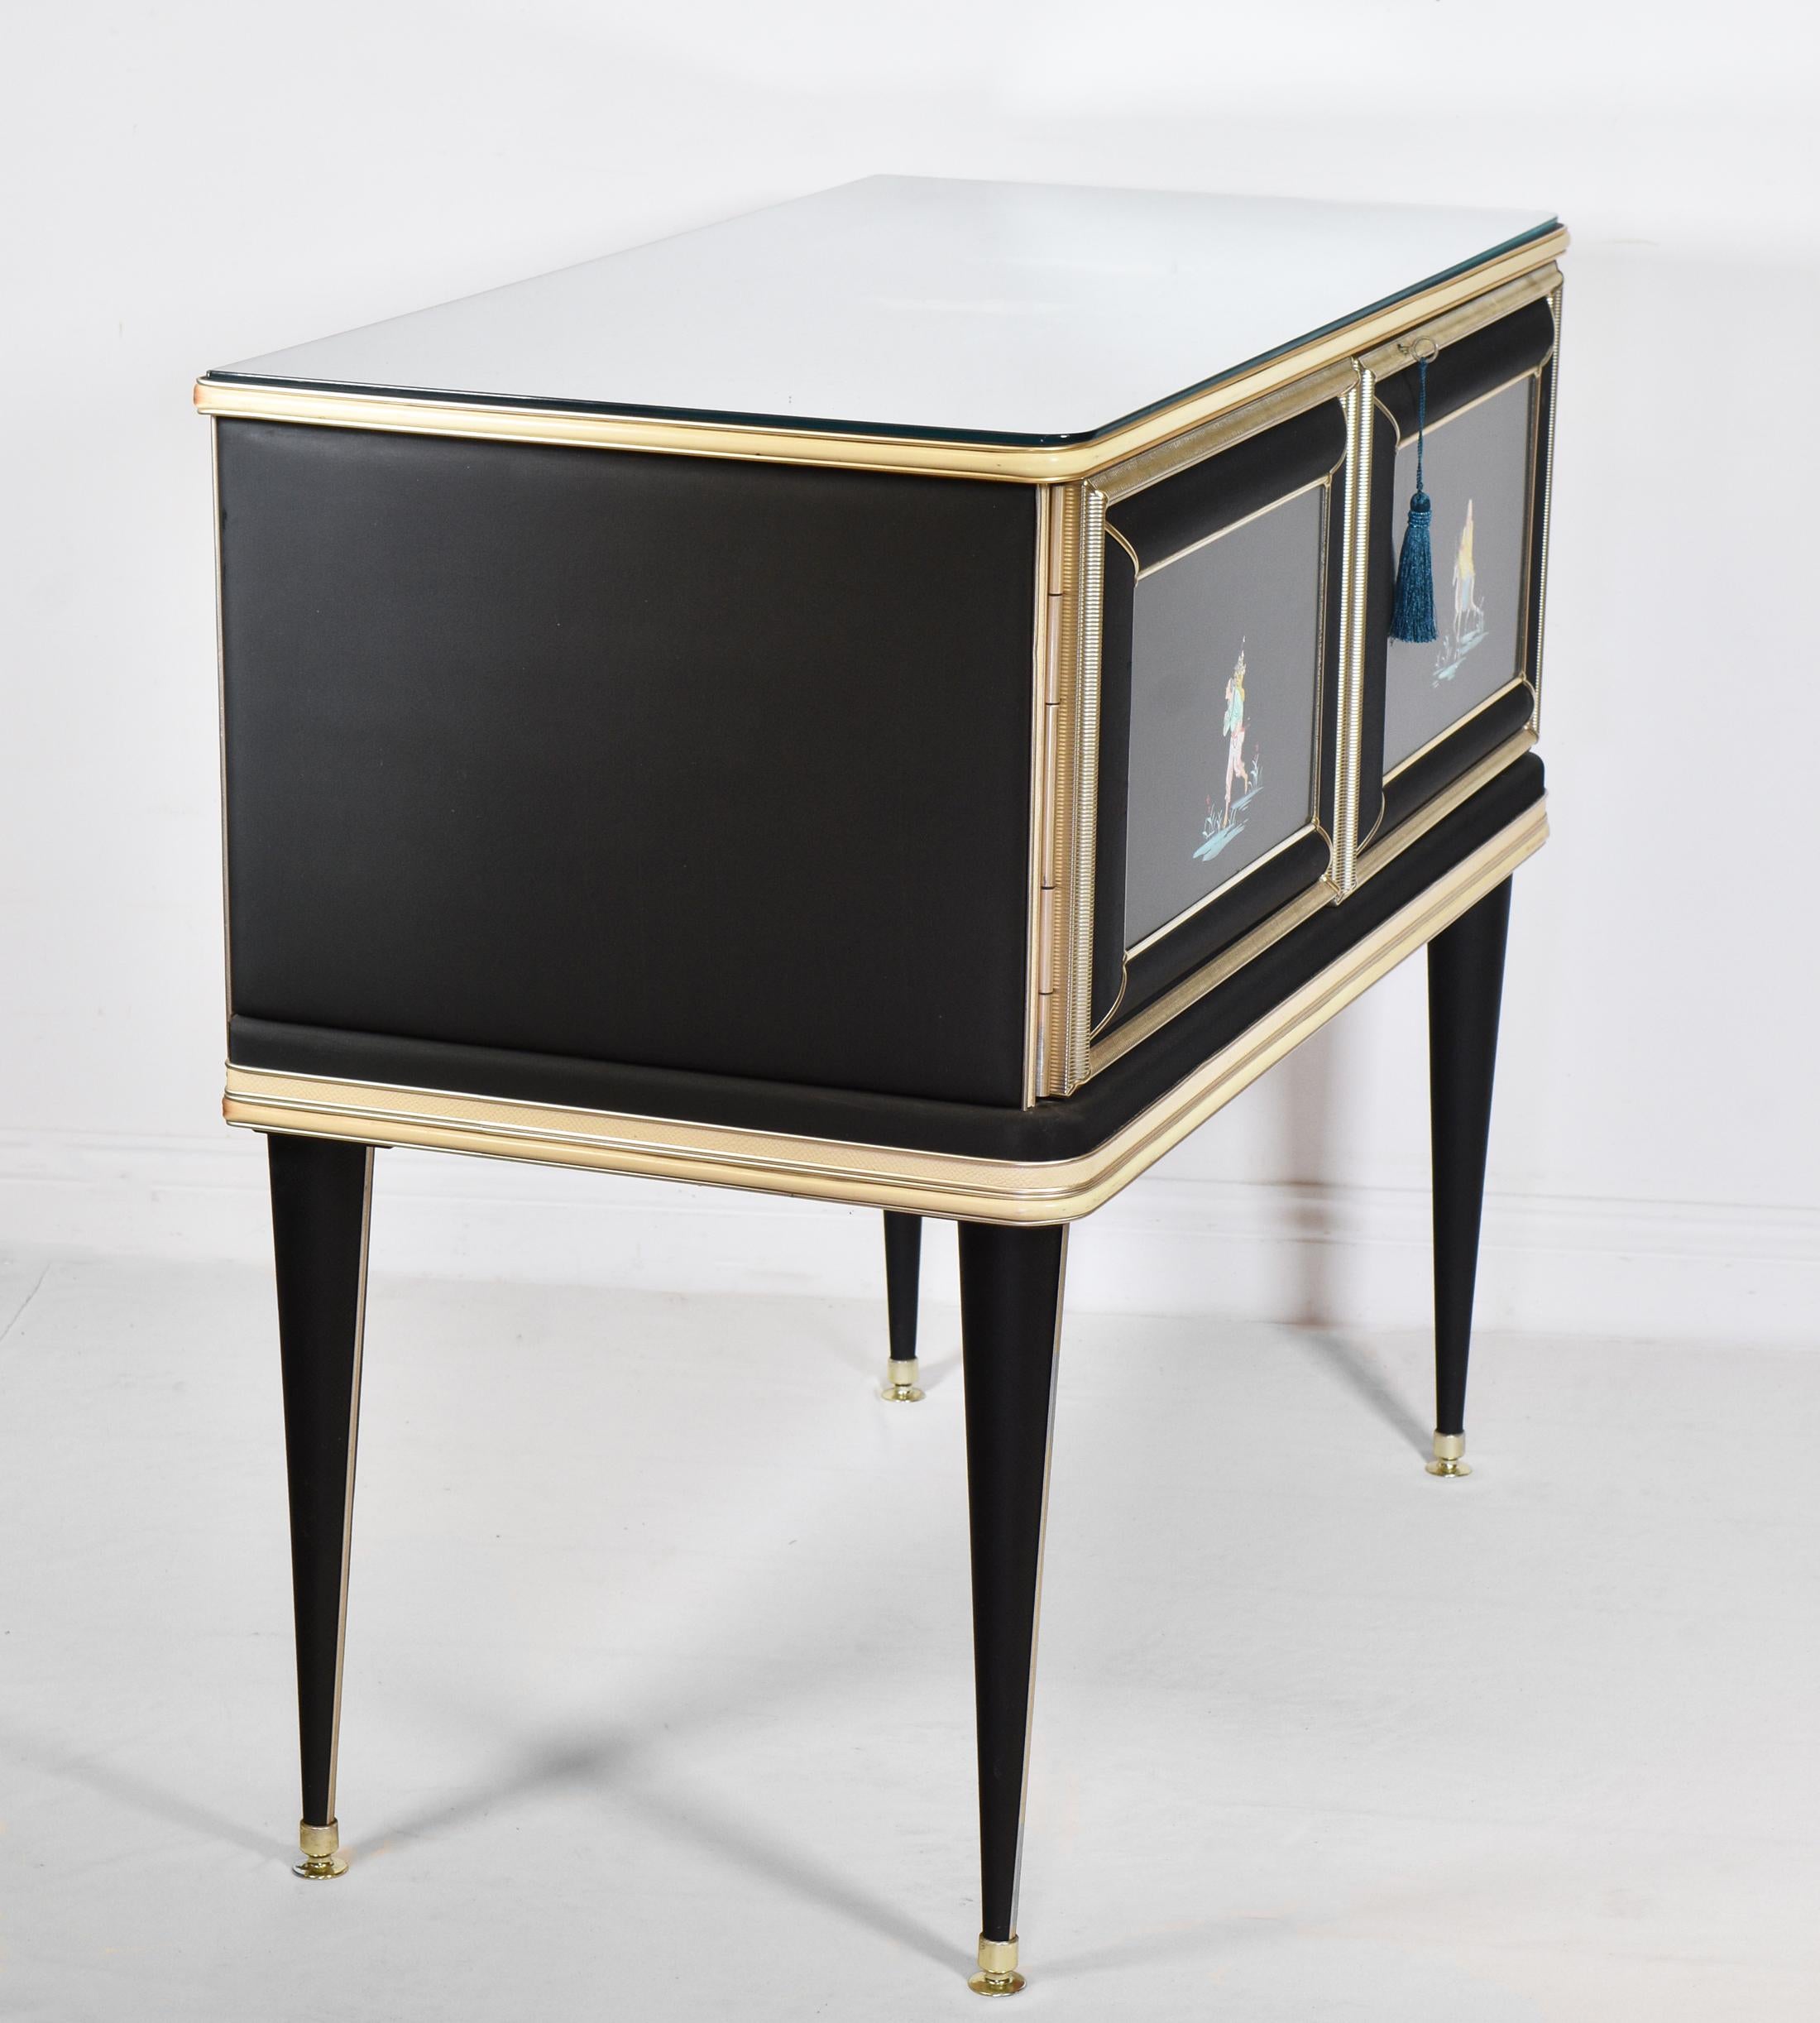 Anodized Umberto Mascagni Chinoiserie Mid Century Sideboard Cabinet from Harrods London